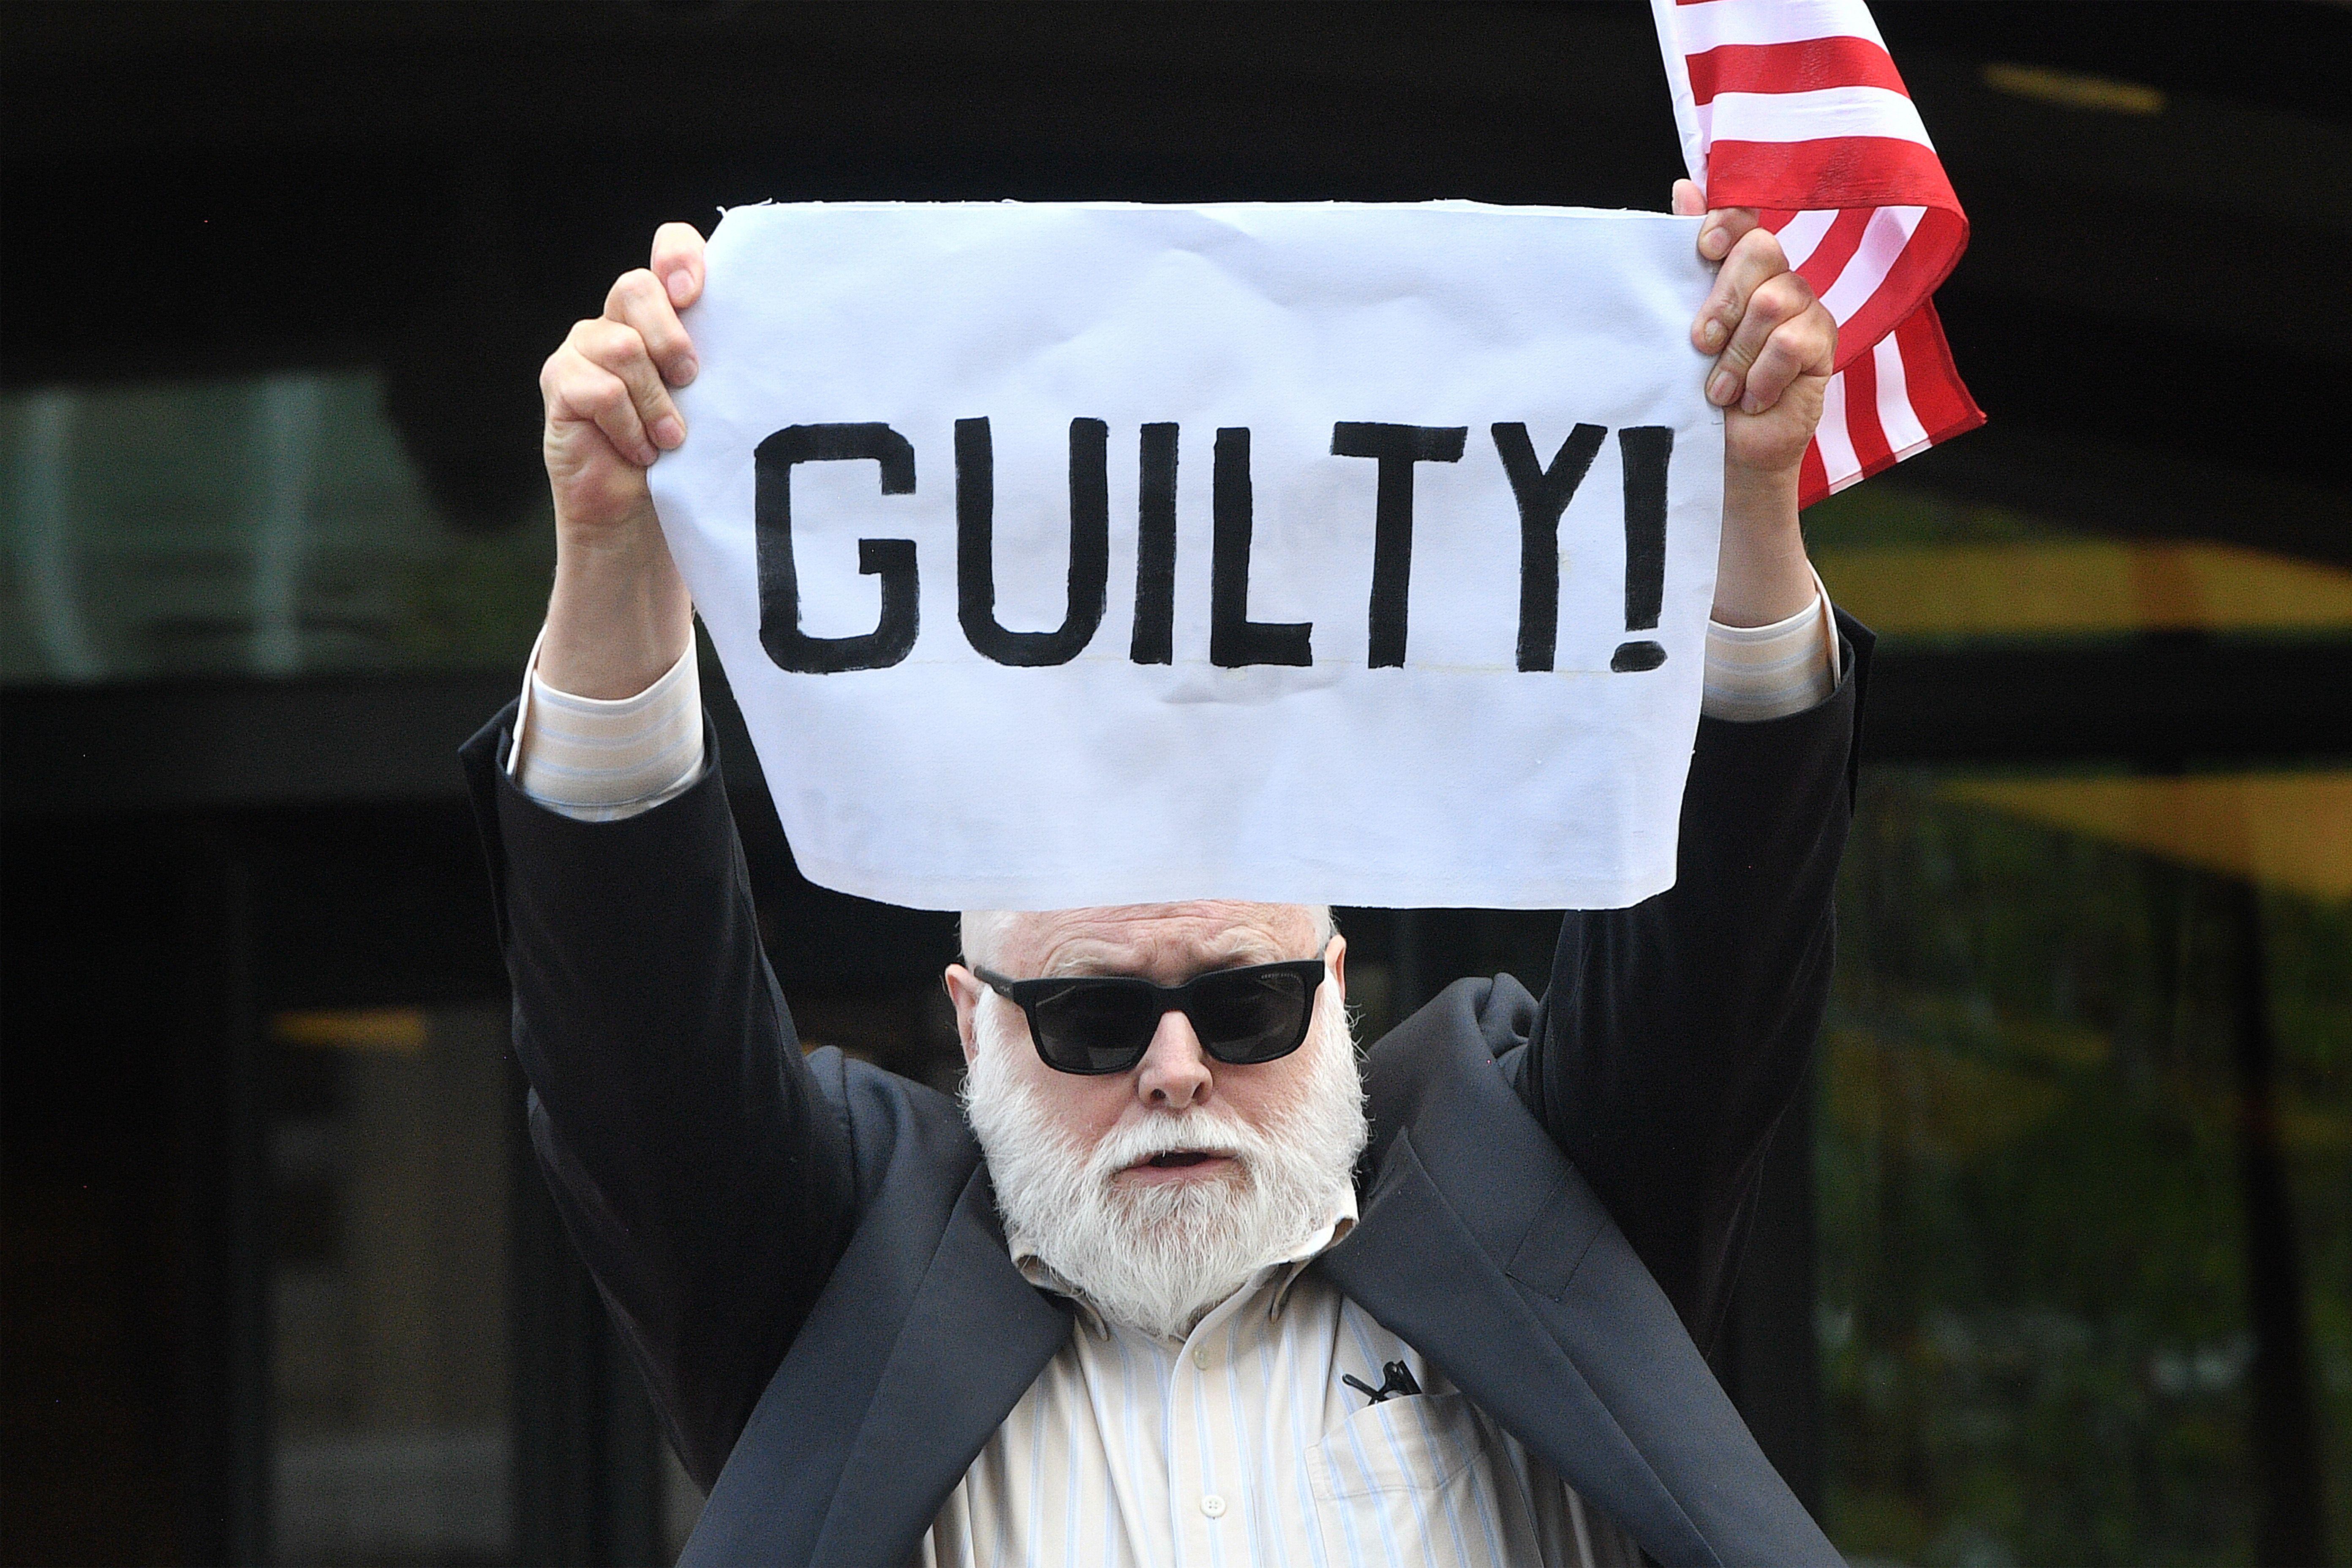 A bearded man with sunglasses holding a large white cloth reading "Guilty"